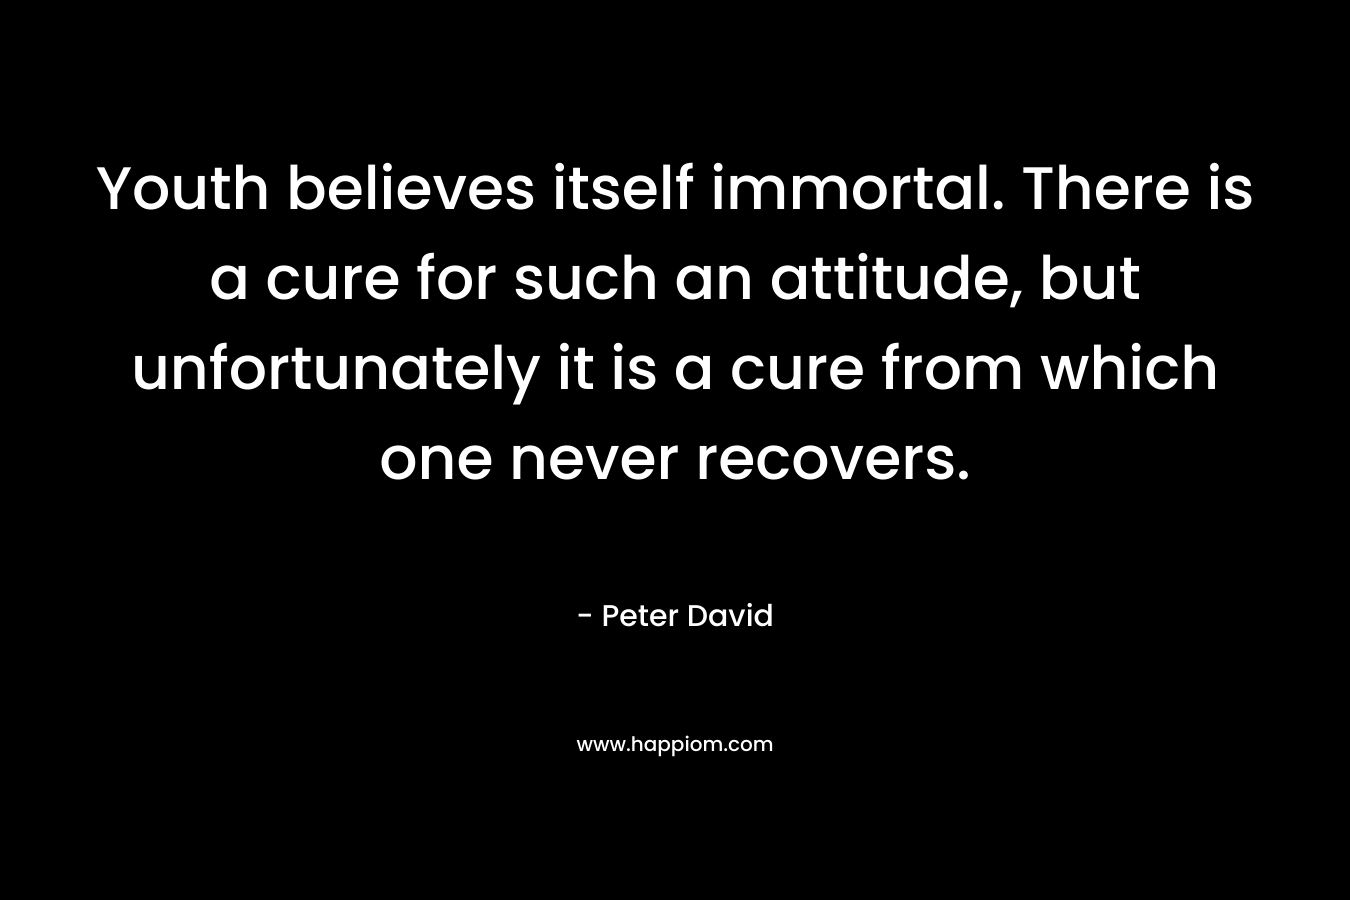 Youth believes itself immortal. There is a cure for such an attitude, but unfortunately it is a cure from which one never recovers. – Peter David